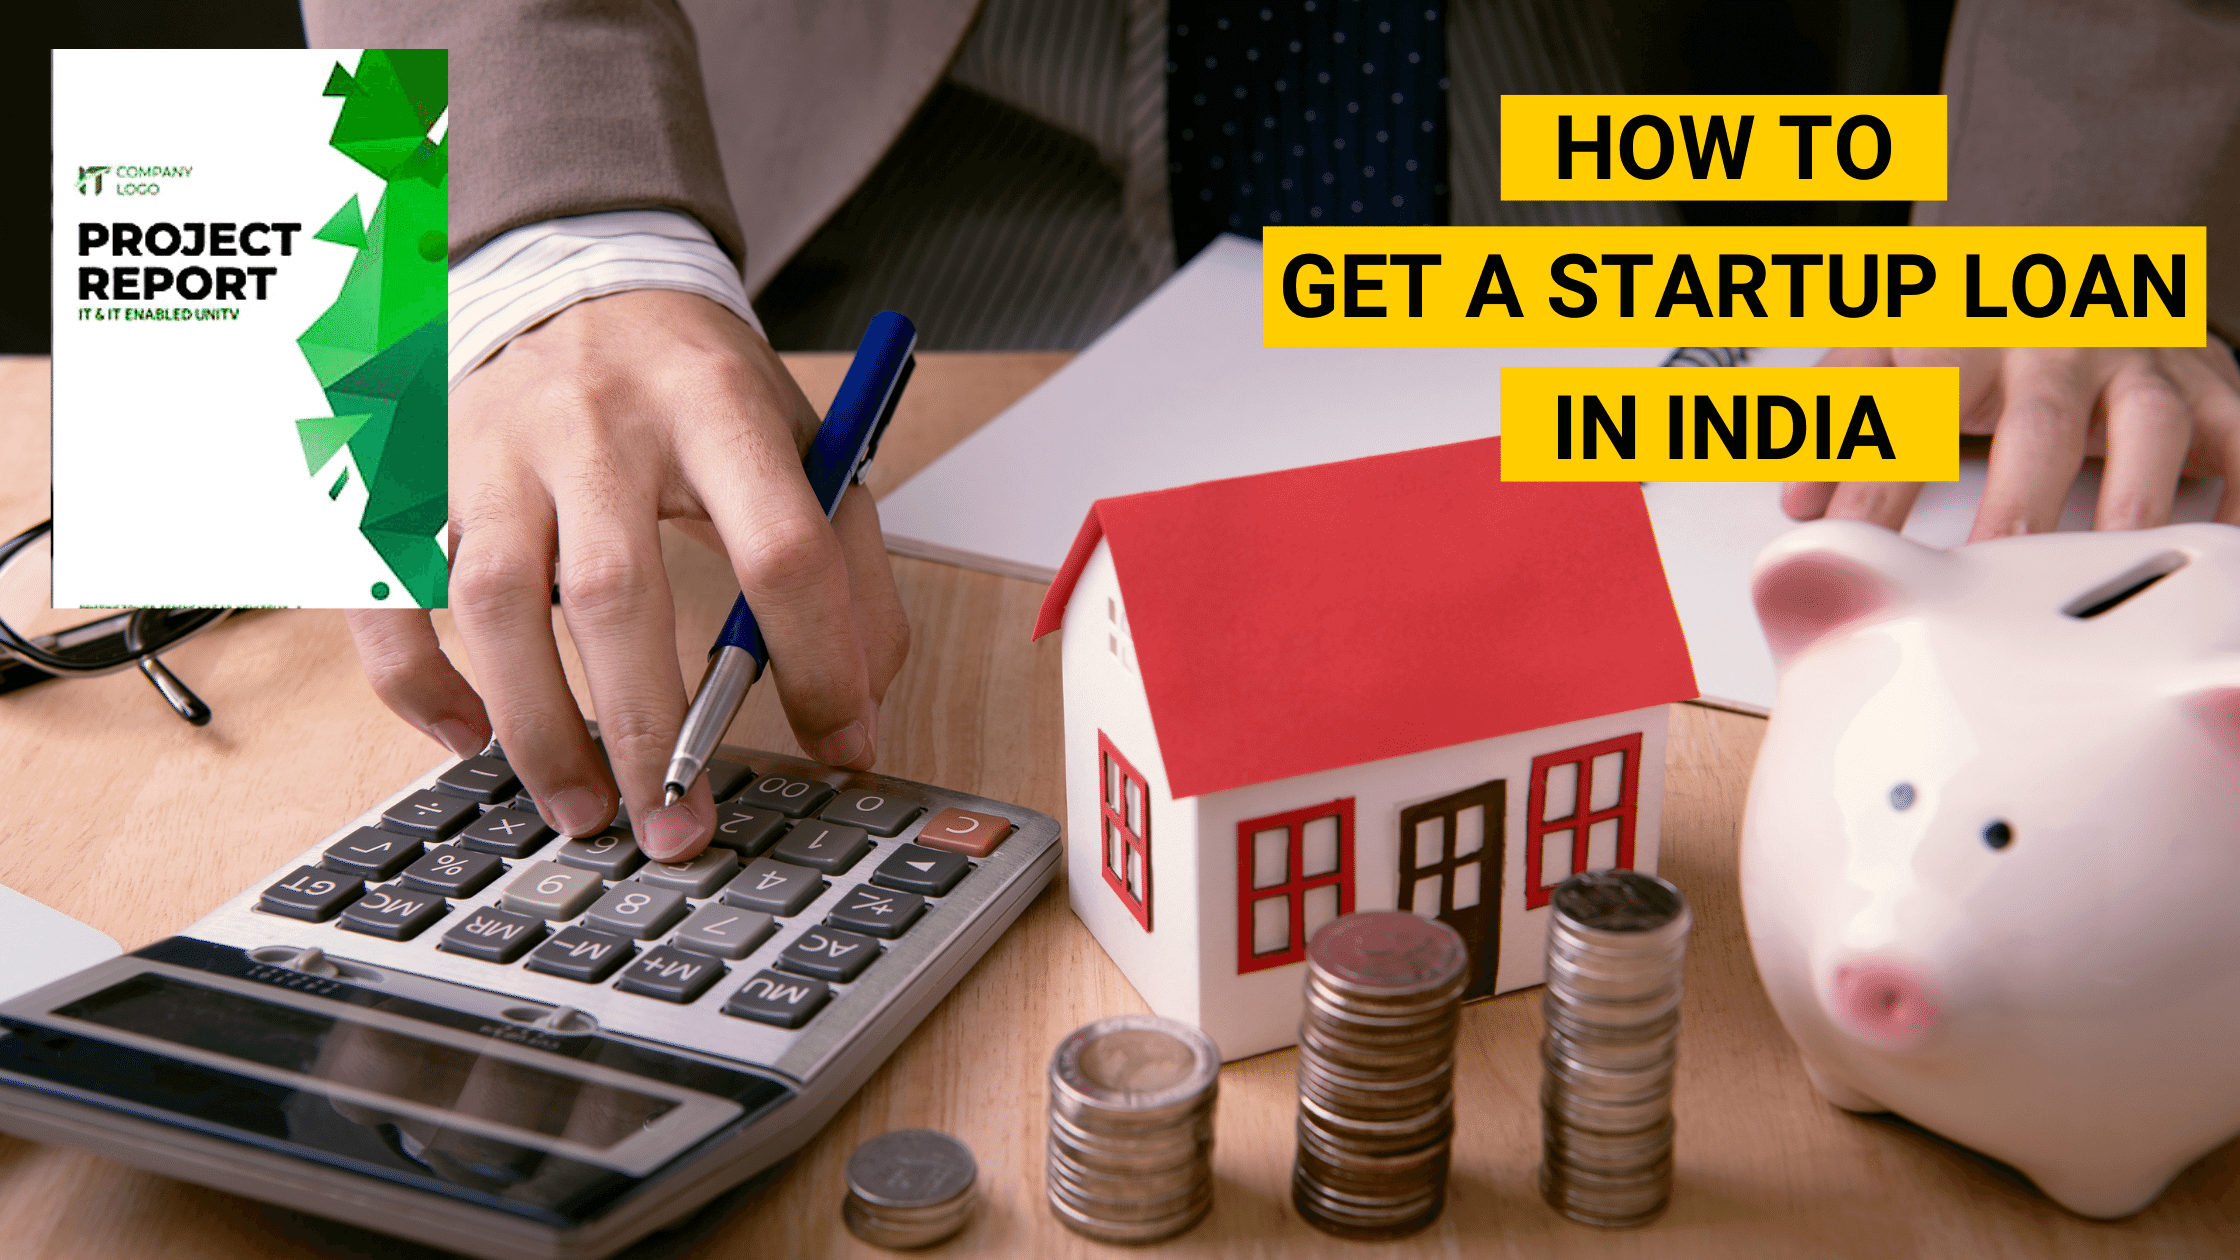 How to get a startup loan in india